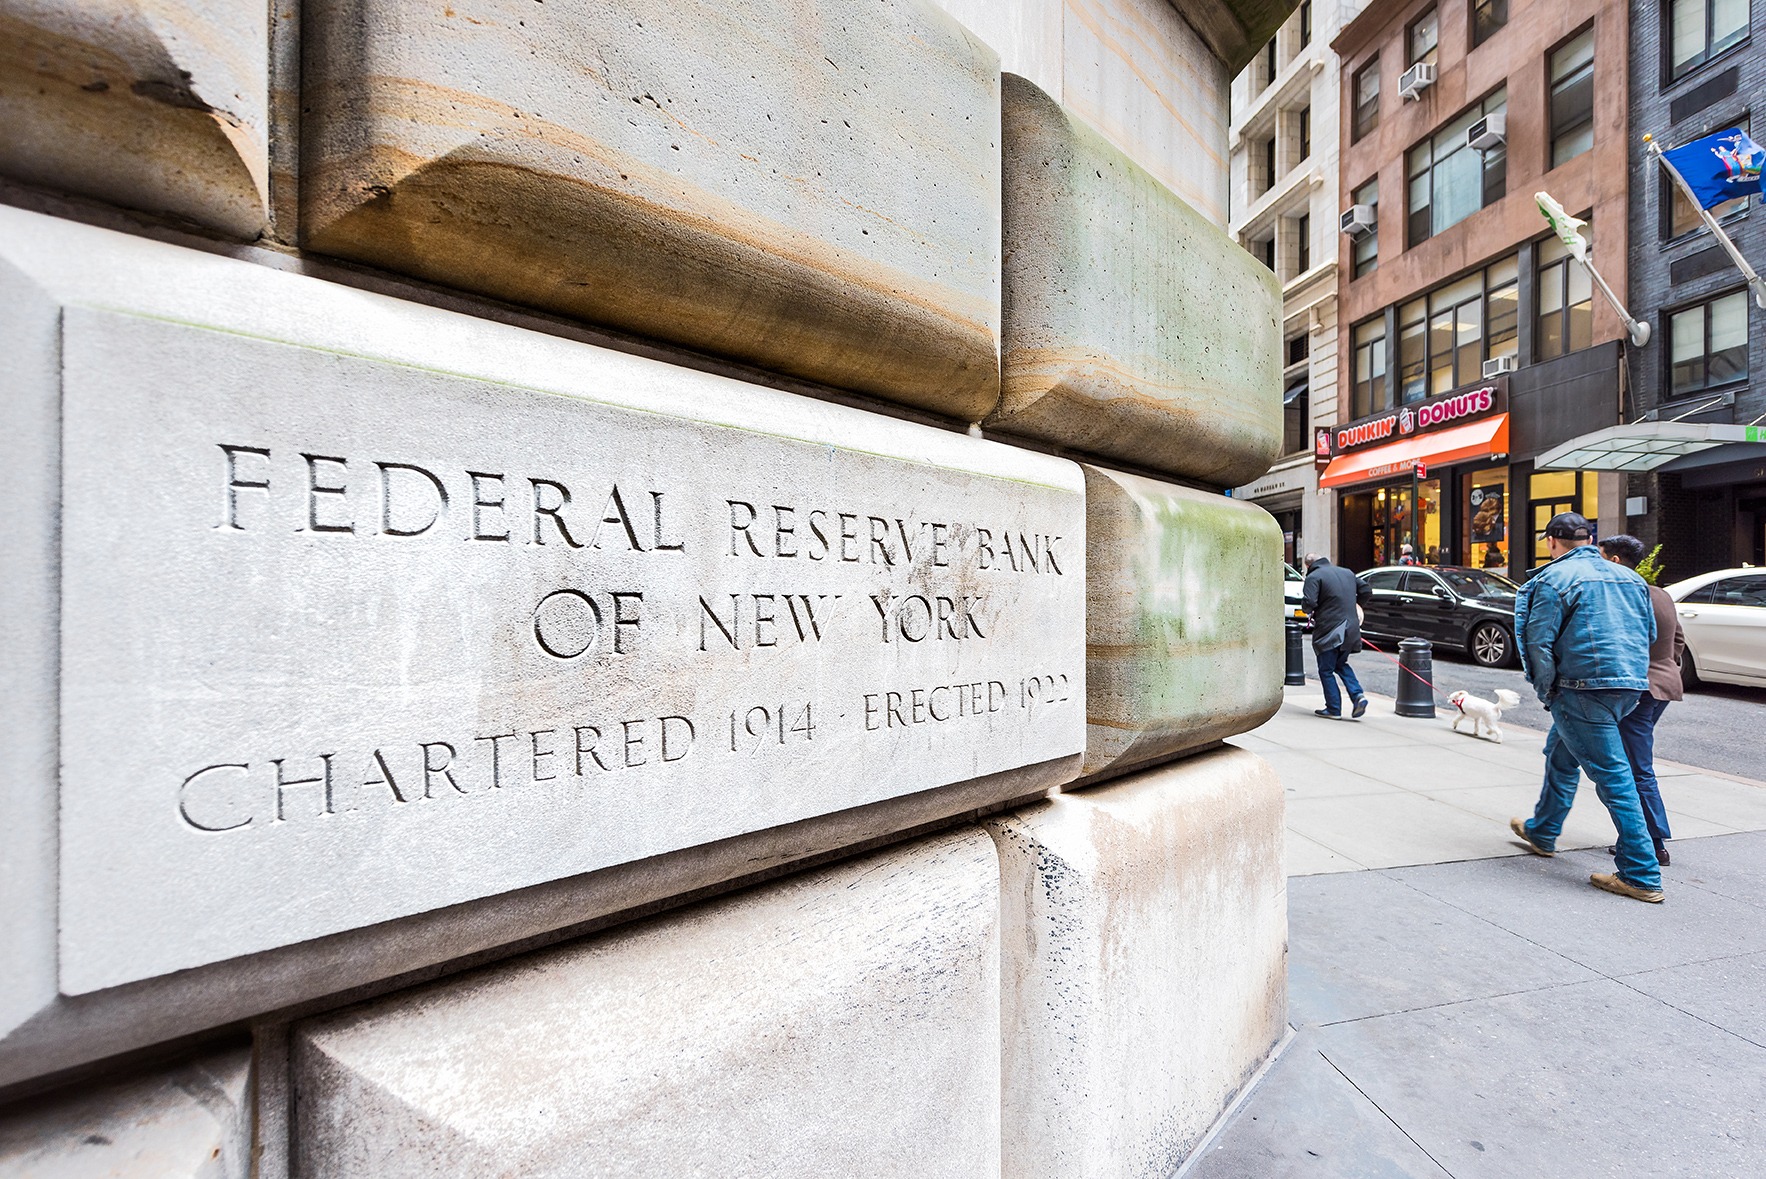 The Federal Reserve Bank of New York plays a crucial role in the financial system of the United States. As one of the 12 regional Reserve Banks, it is responsible for executing monetary policy and maintaining financial